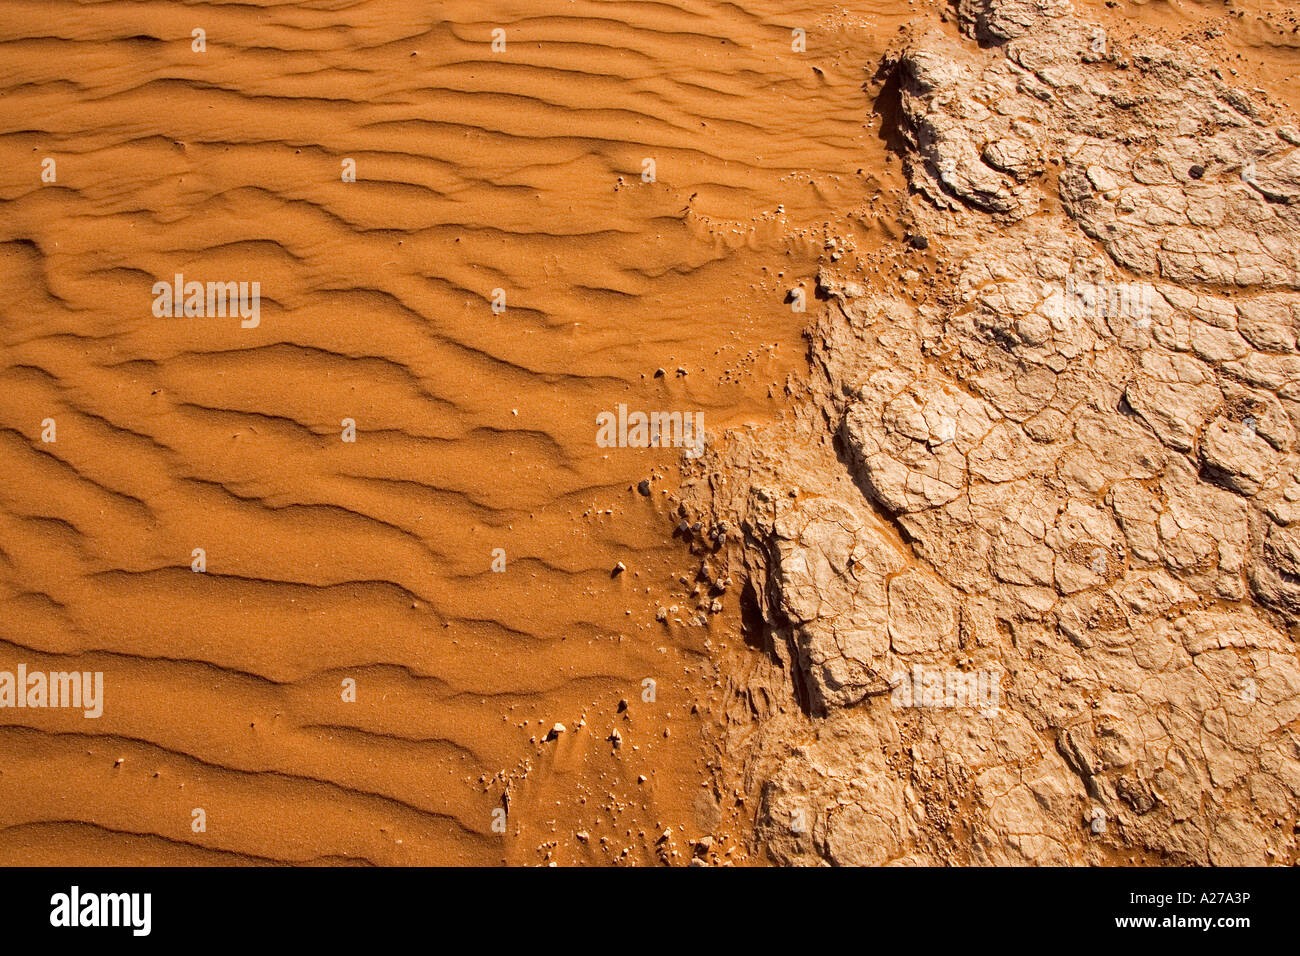 Structure with sand and dry loam in Namib desert, Namibia Stock Photo